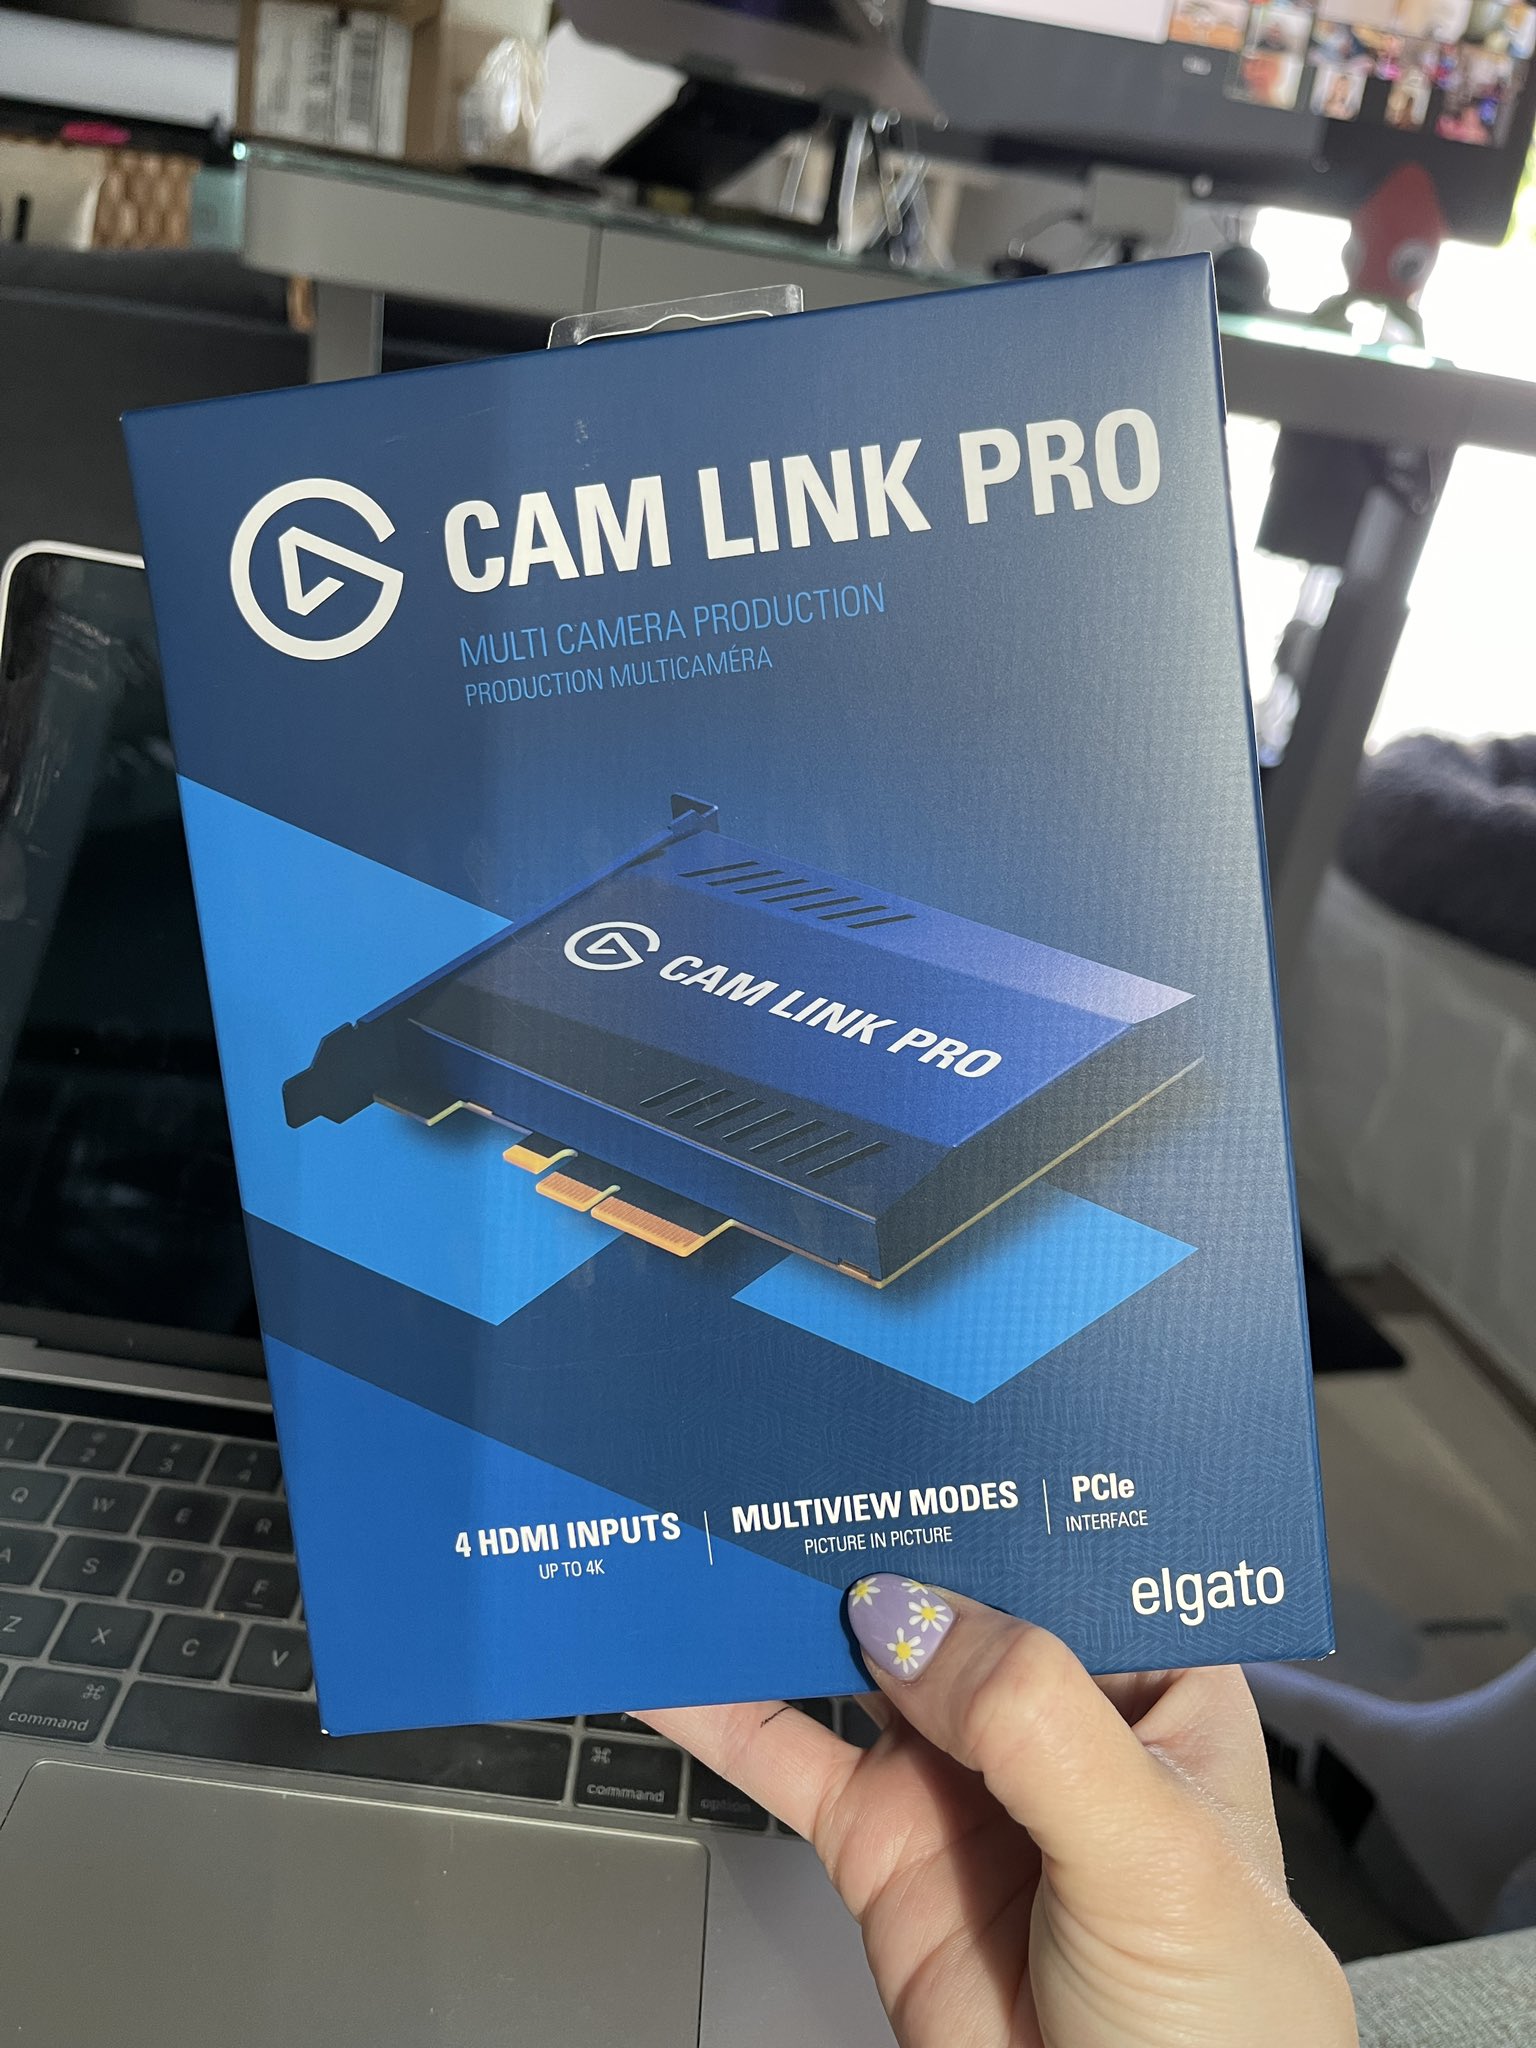 Andrea Rene Oh Look What Arrived Today Thanks To Fast Fingers On The Website Johntdrake Excited To Test Out The New Elgato Cam Link Pro T Co Xfhfui81nm